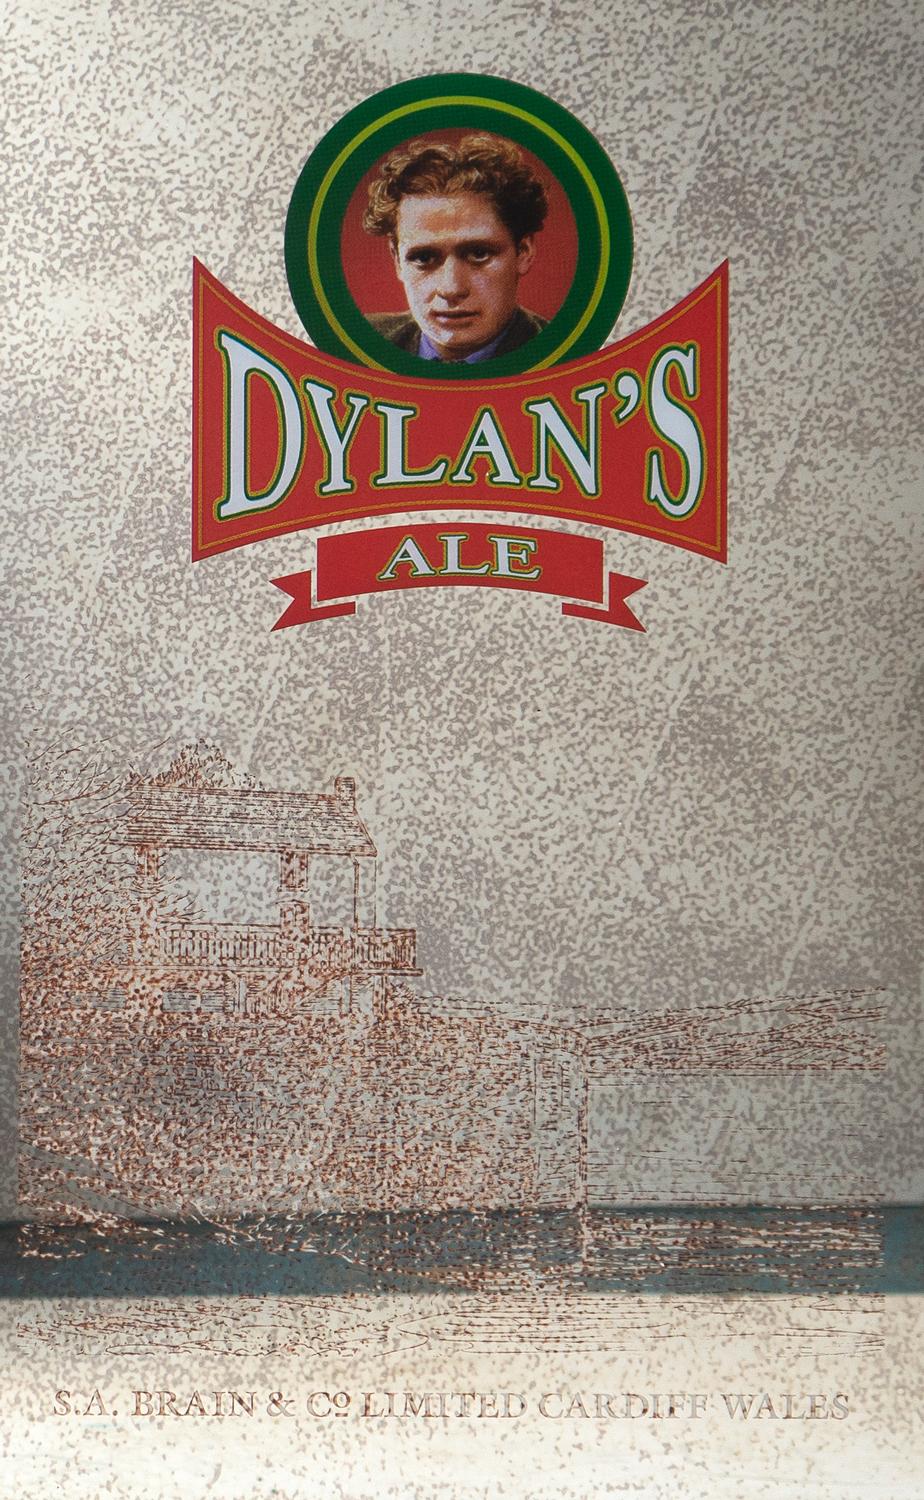 Dylan Thomas Interest Vintage Dylan's Ale Brains Brewery Advertising Mirror Sign In Good Condition For Sale In Bristol, GB